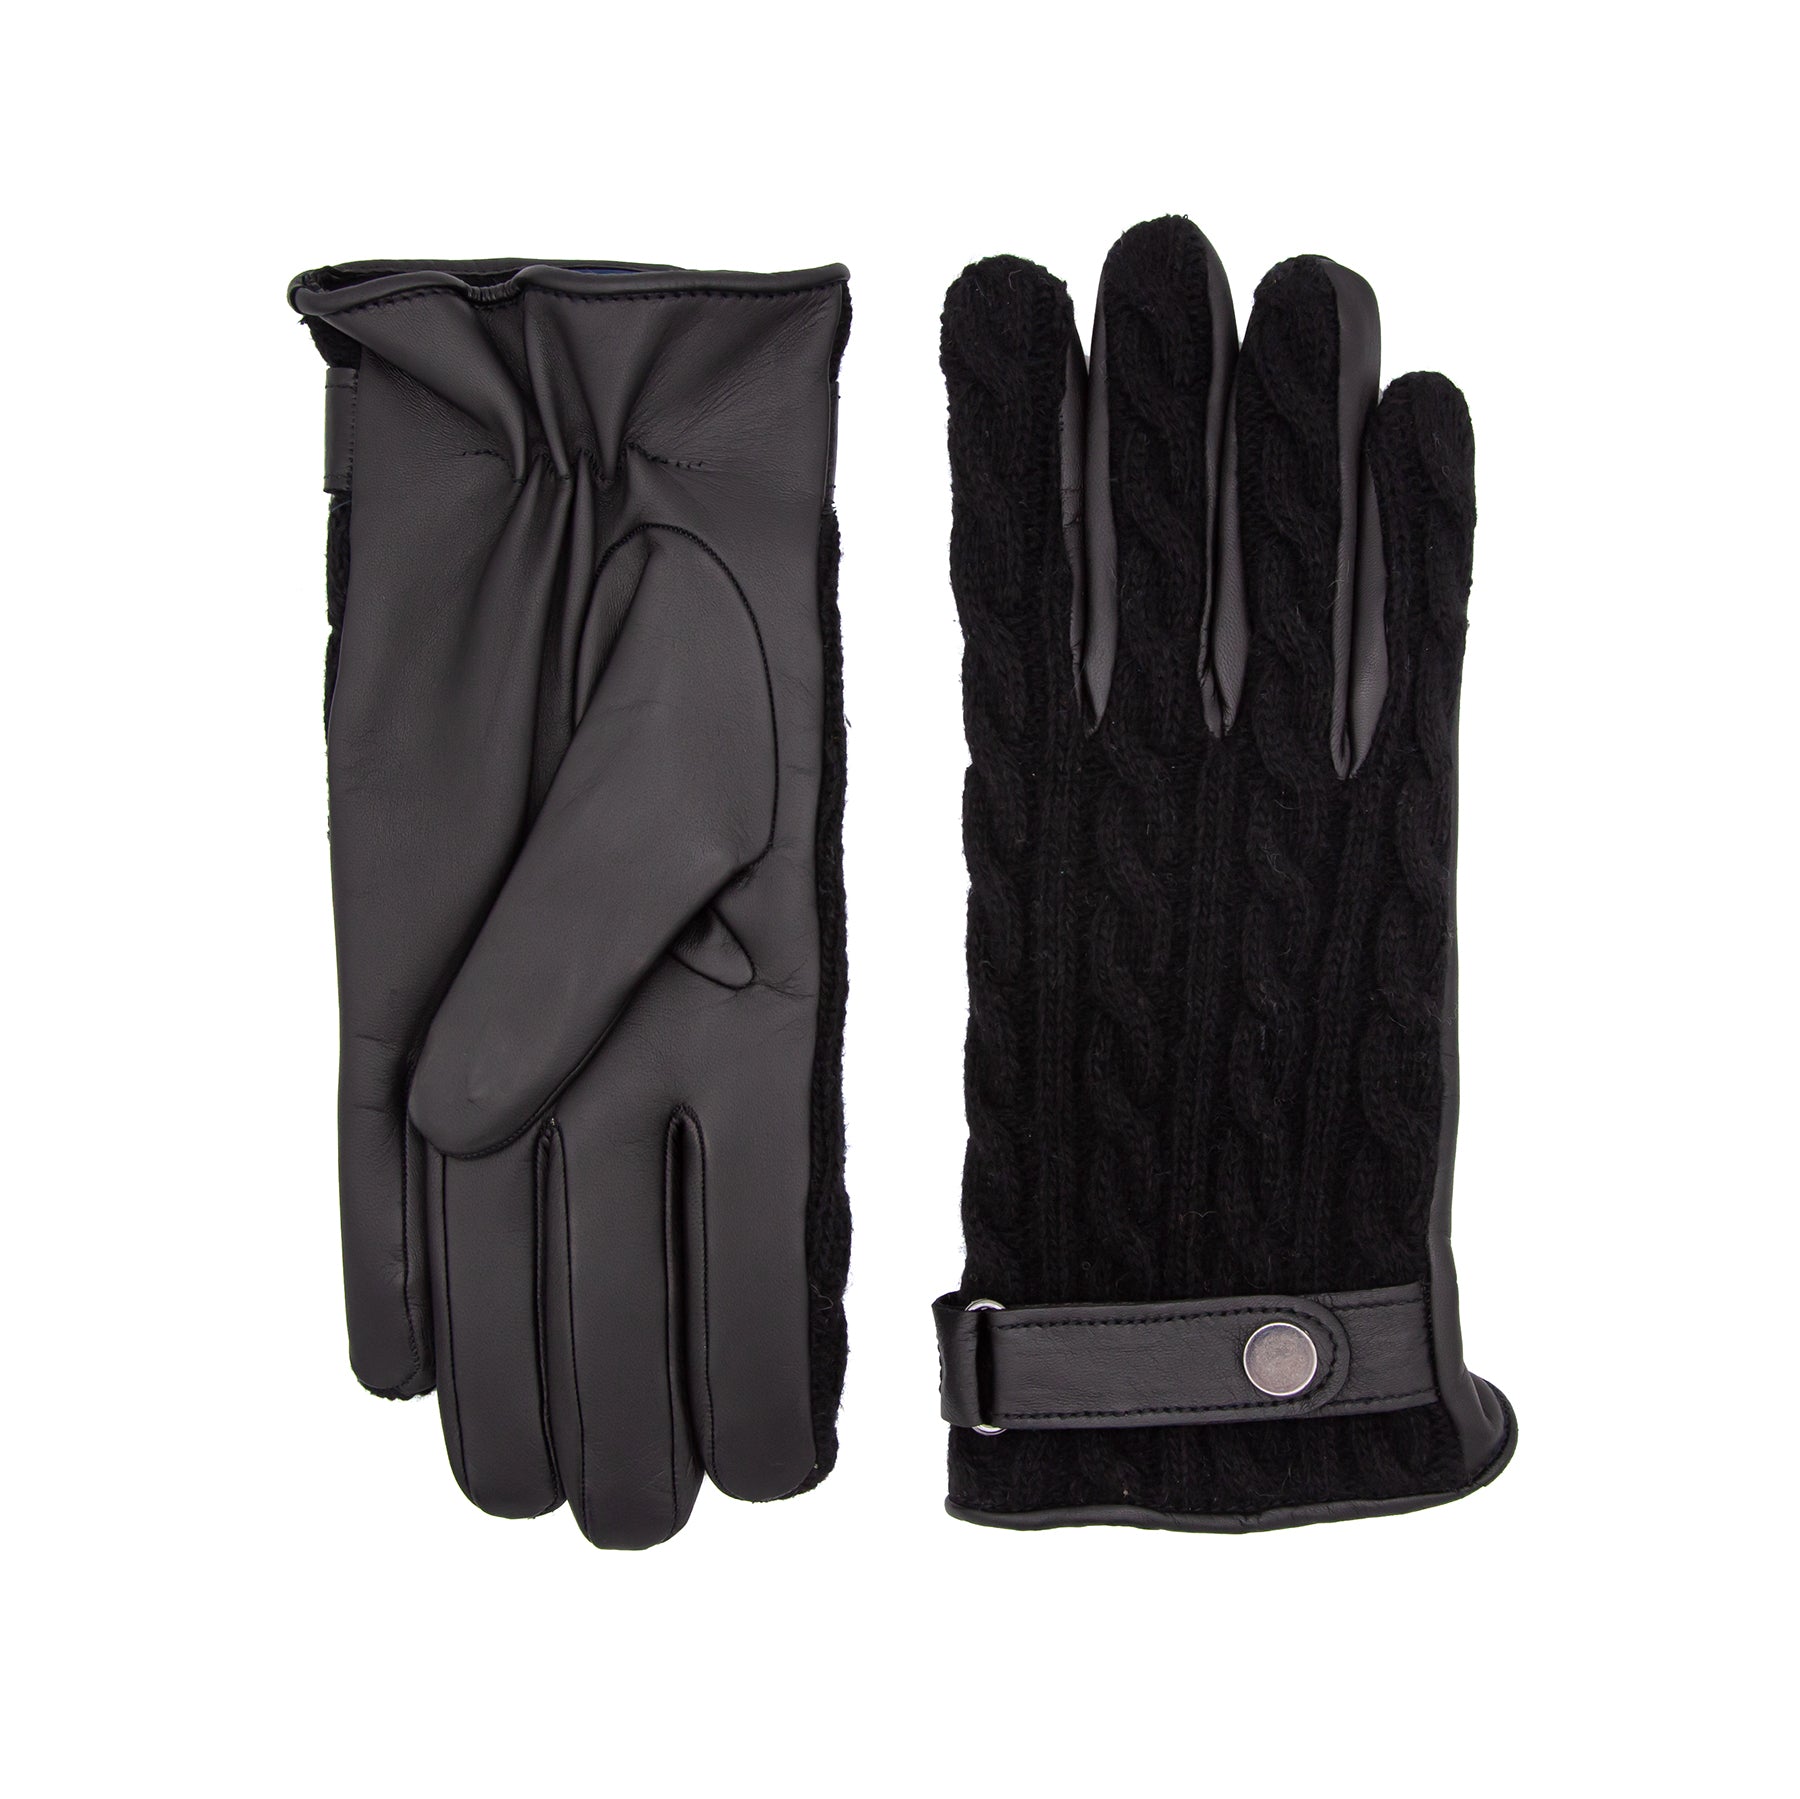 Men's black nappa touch leather gloves with weaved wool top and leather strap